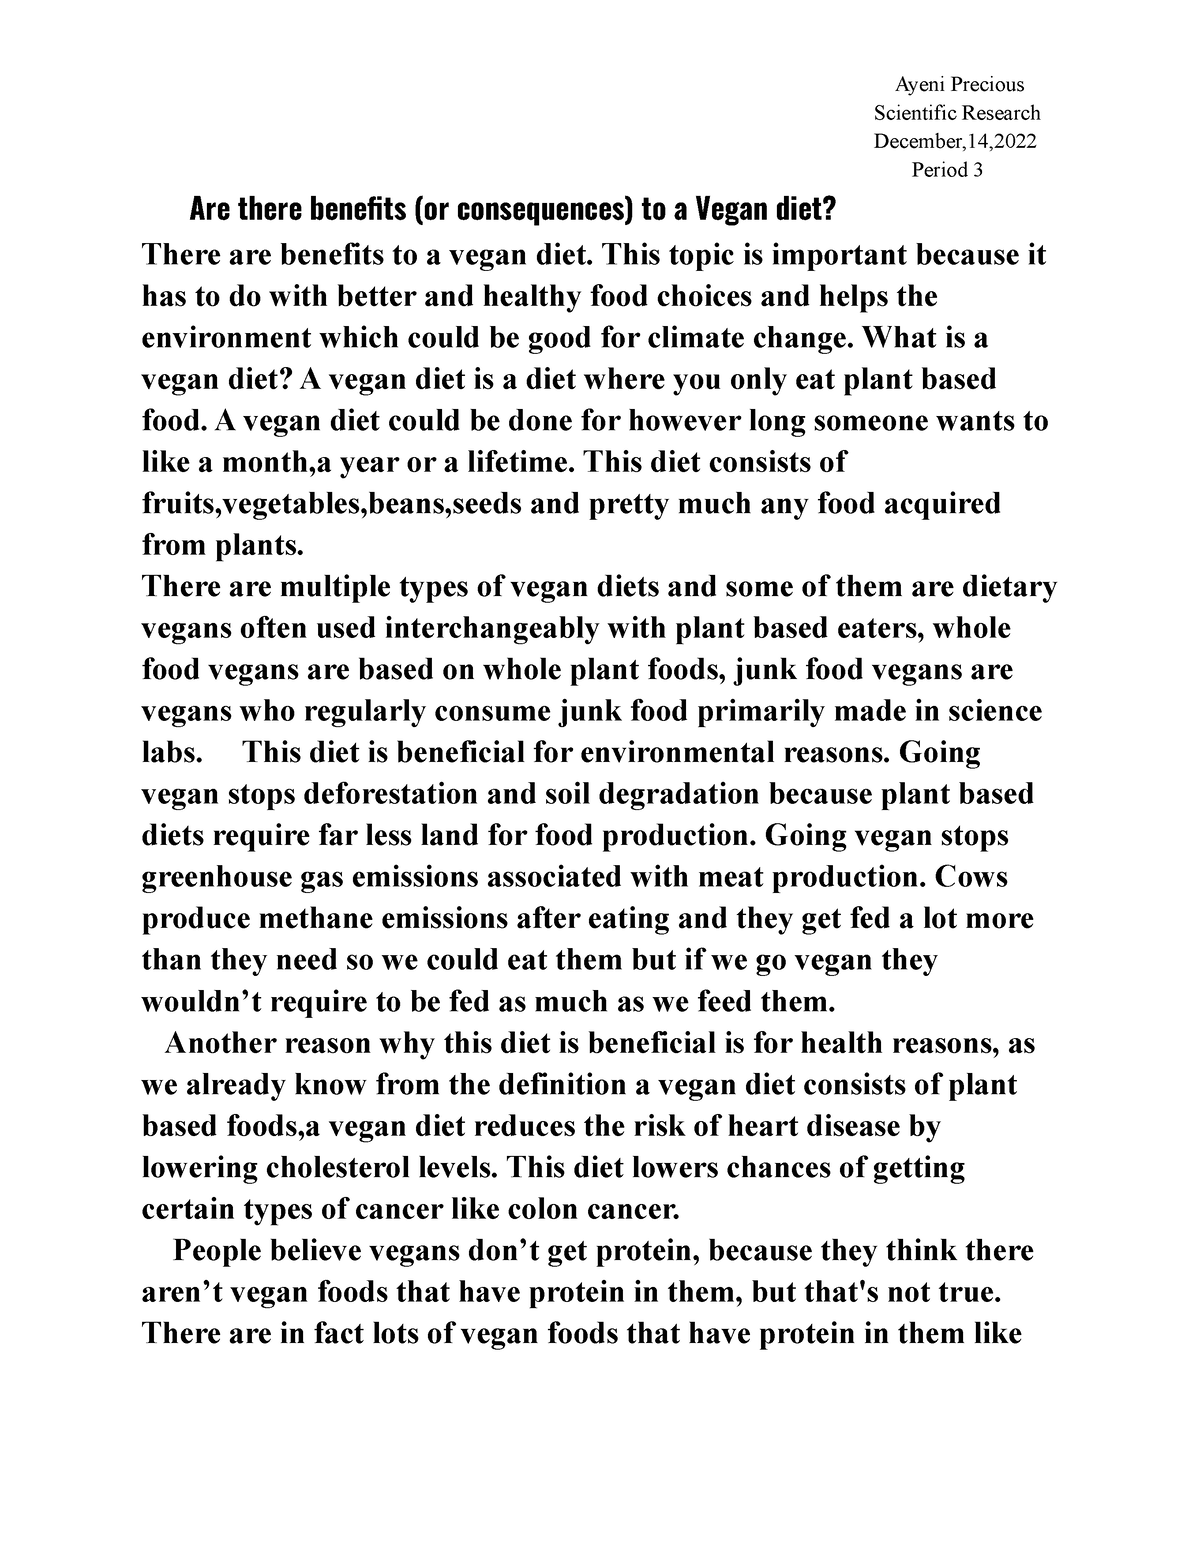 opinion essay about vegetarian